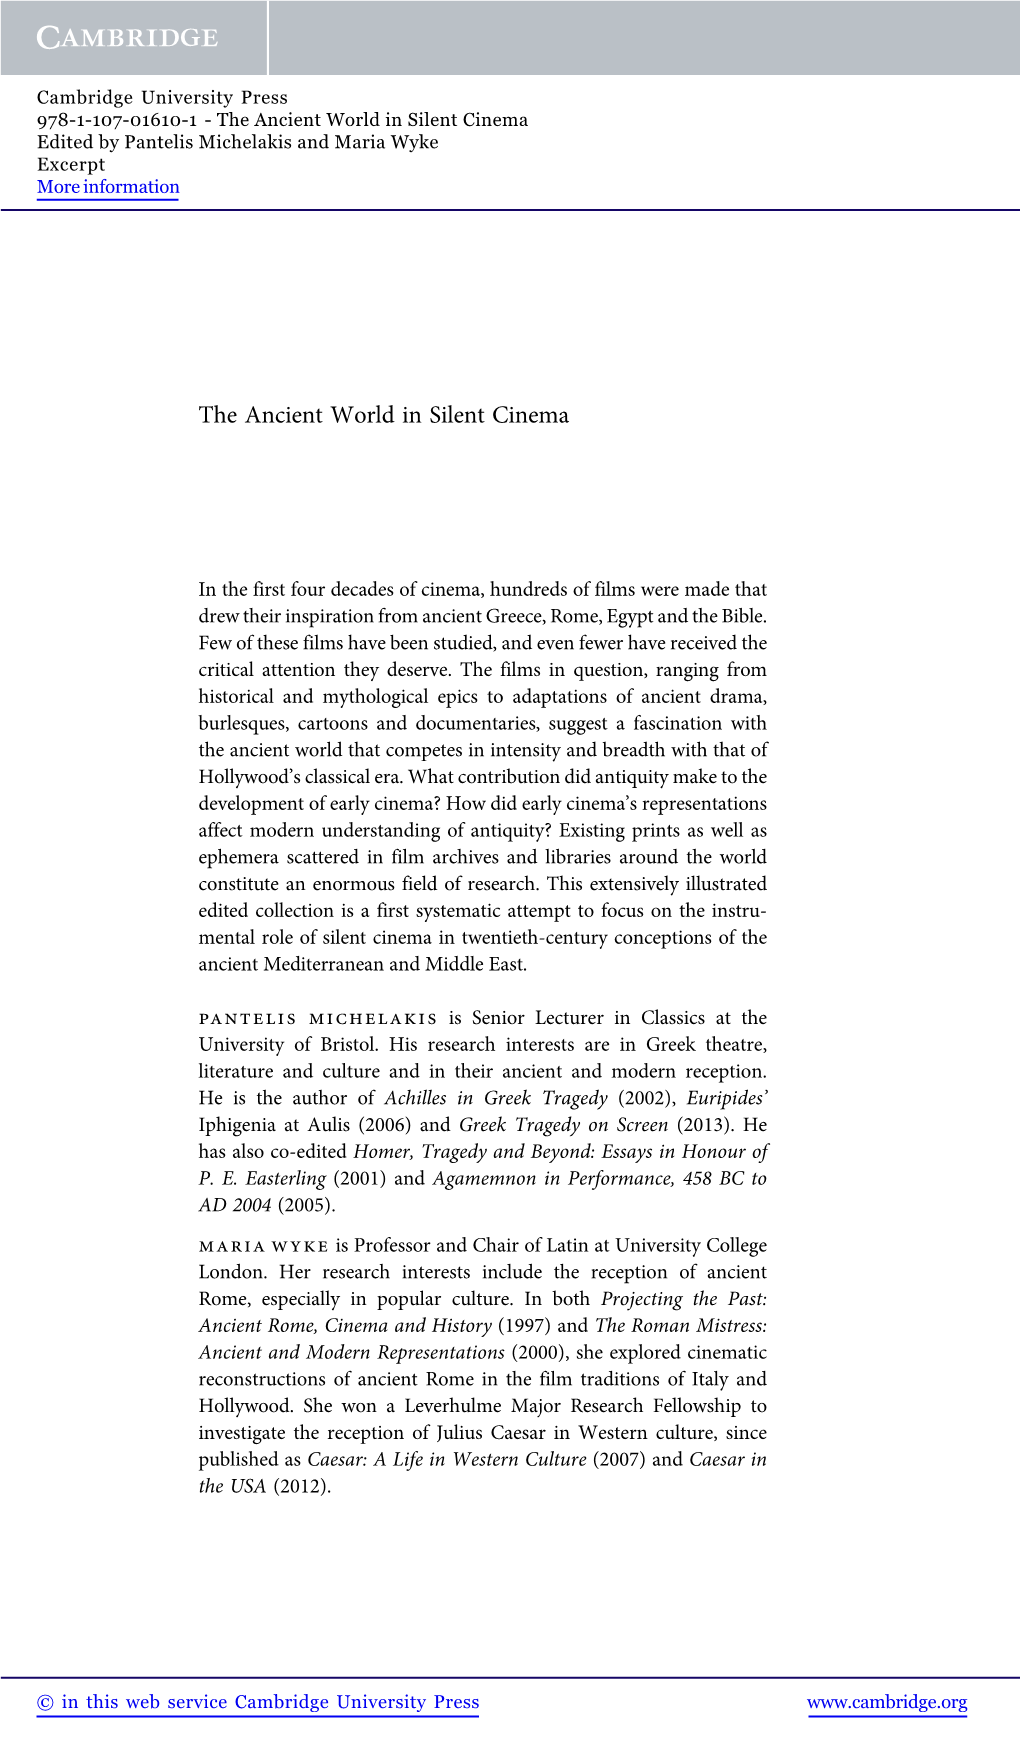 The Ancient World in Silent Cinema Edited by Pantelis Michelakis and Maria Wyke Excerpt More Information